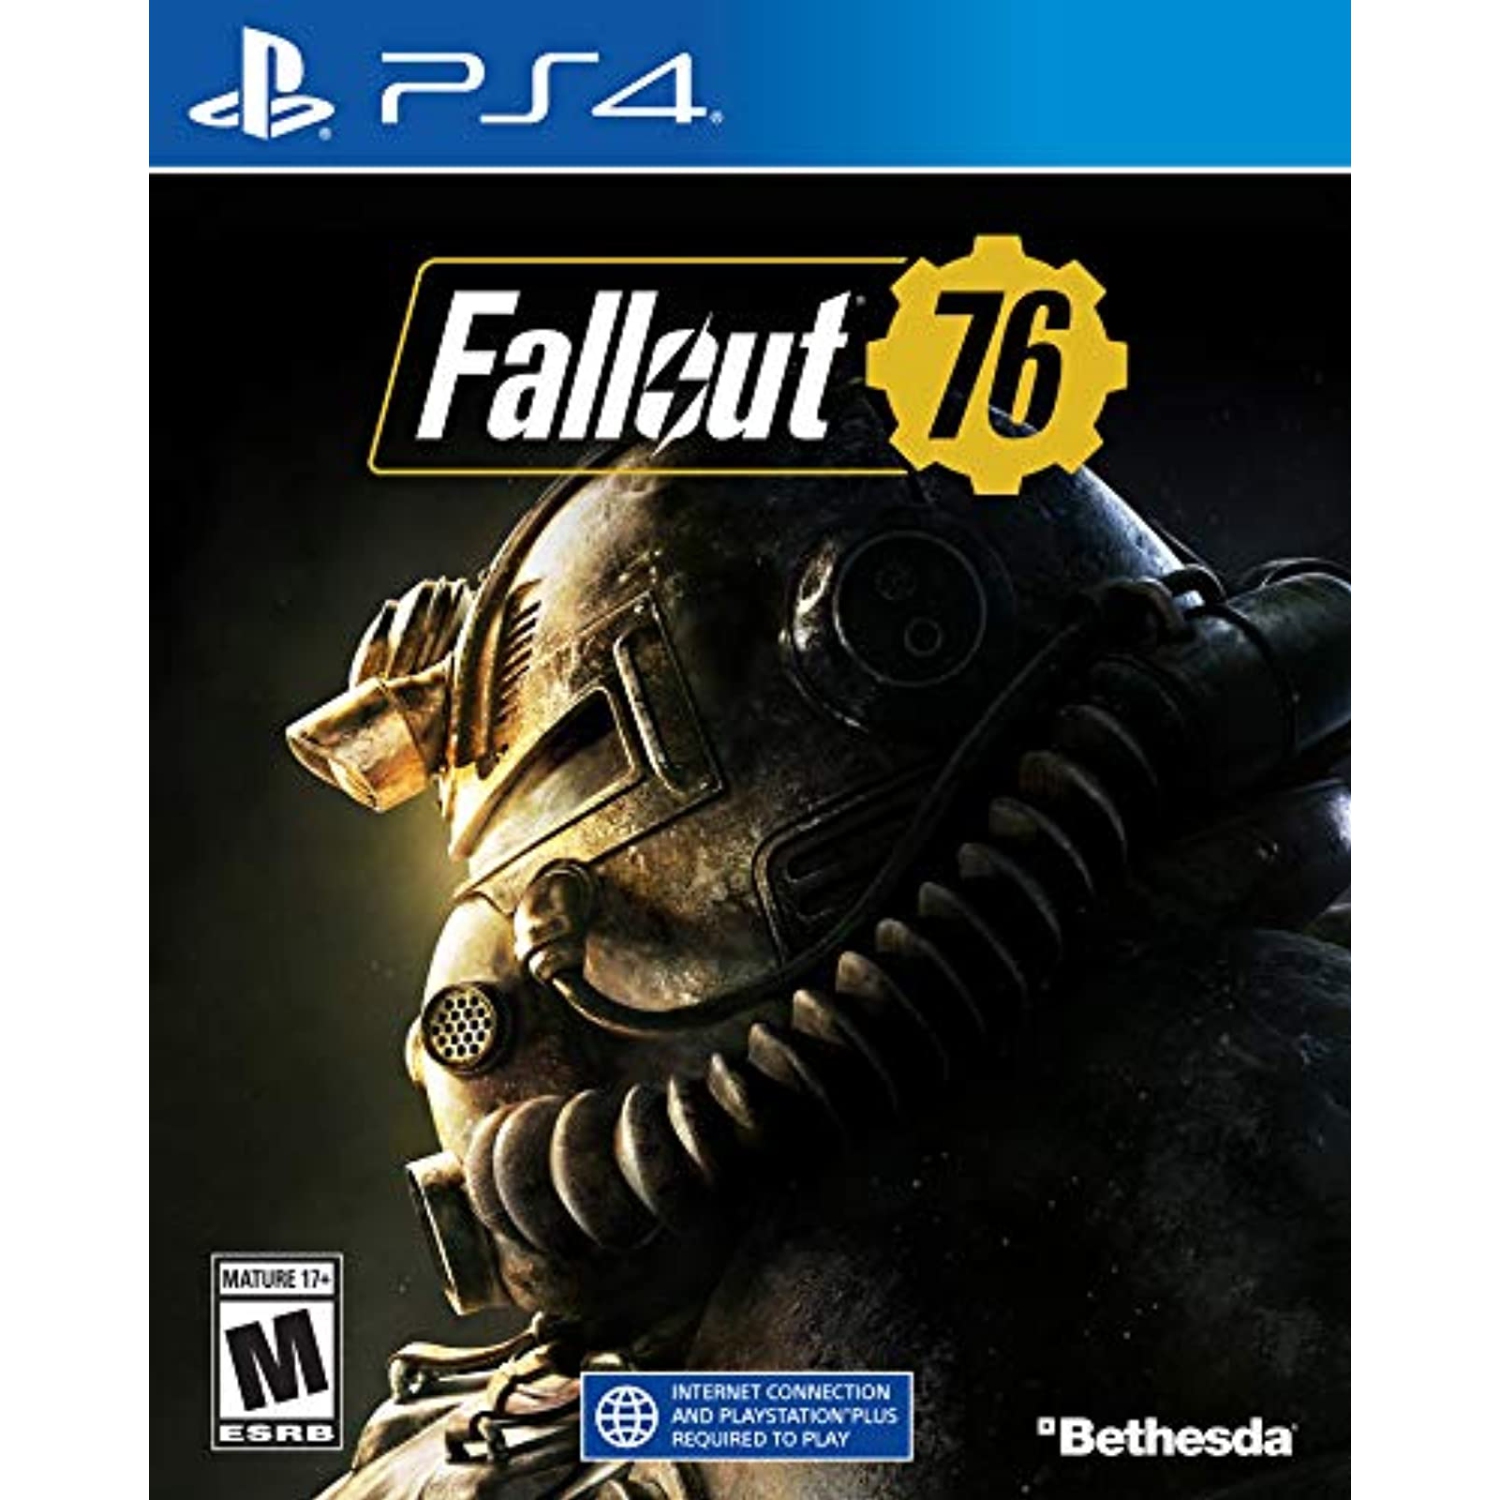 Previously Played - Fallout 76: Wastelanders For PlayStation 4 PS4 RPG